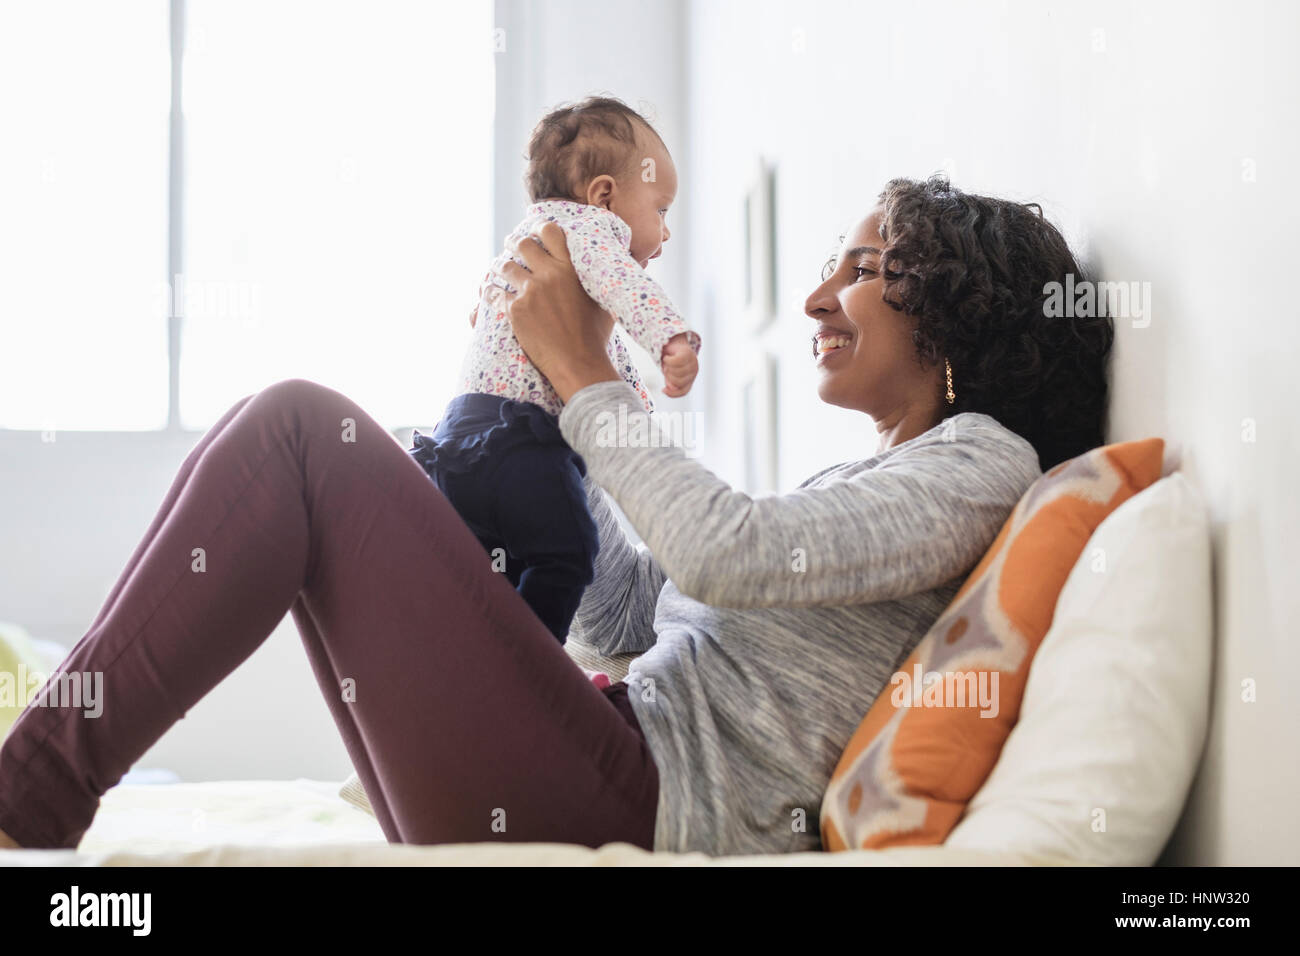 Hispanic mother playing with baby daughter on bed Stock Photo